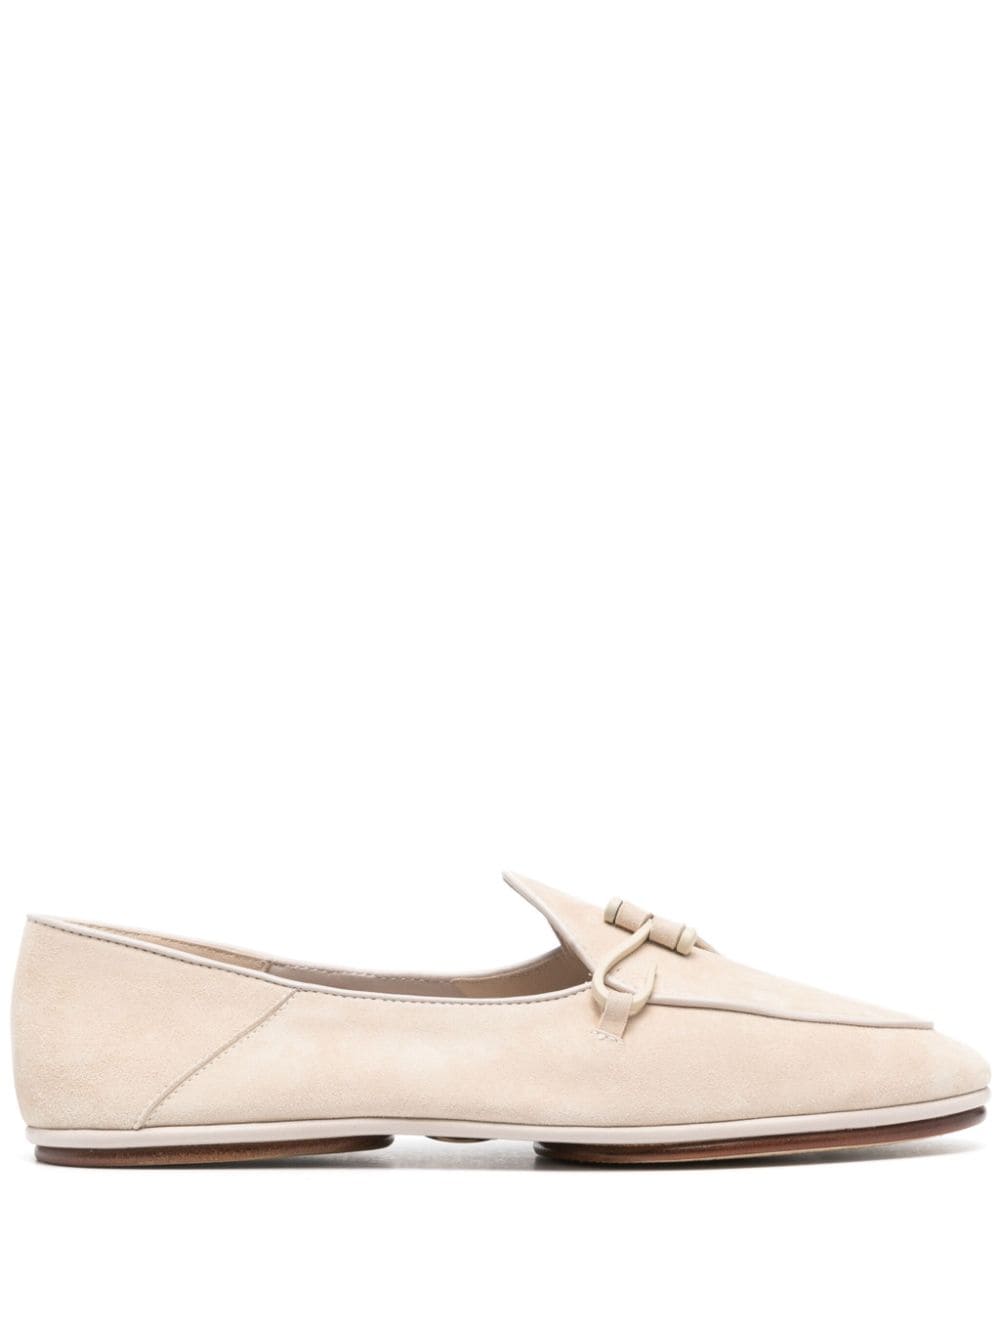 EDHEN MILANO COMPORTA FLY SUEDE LOAFERS